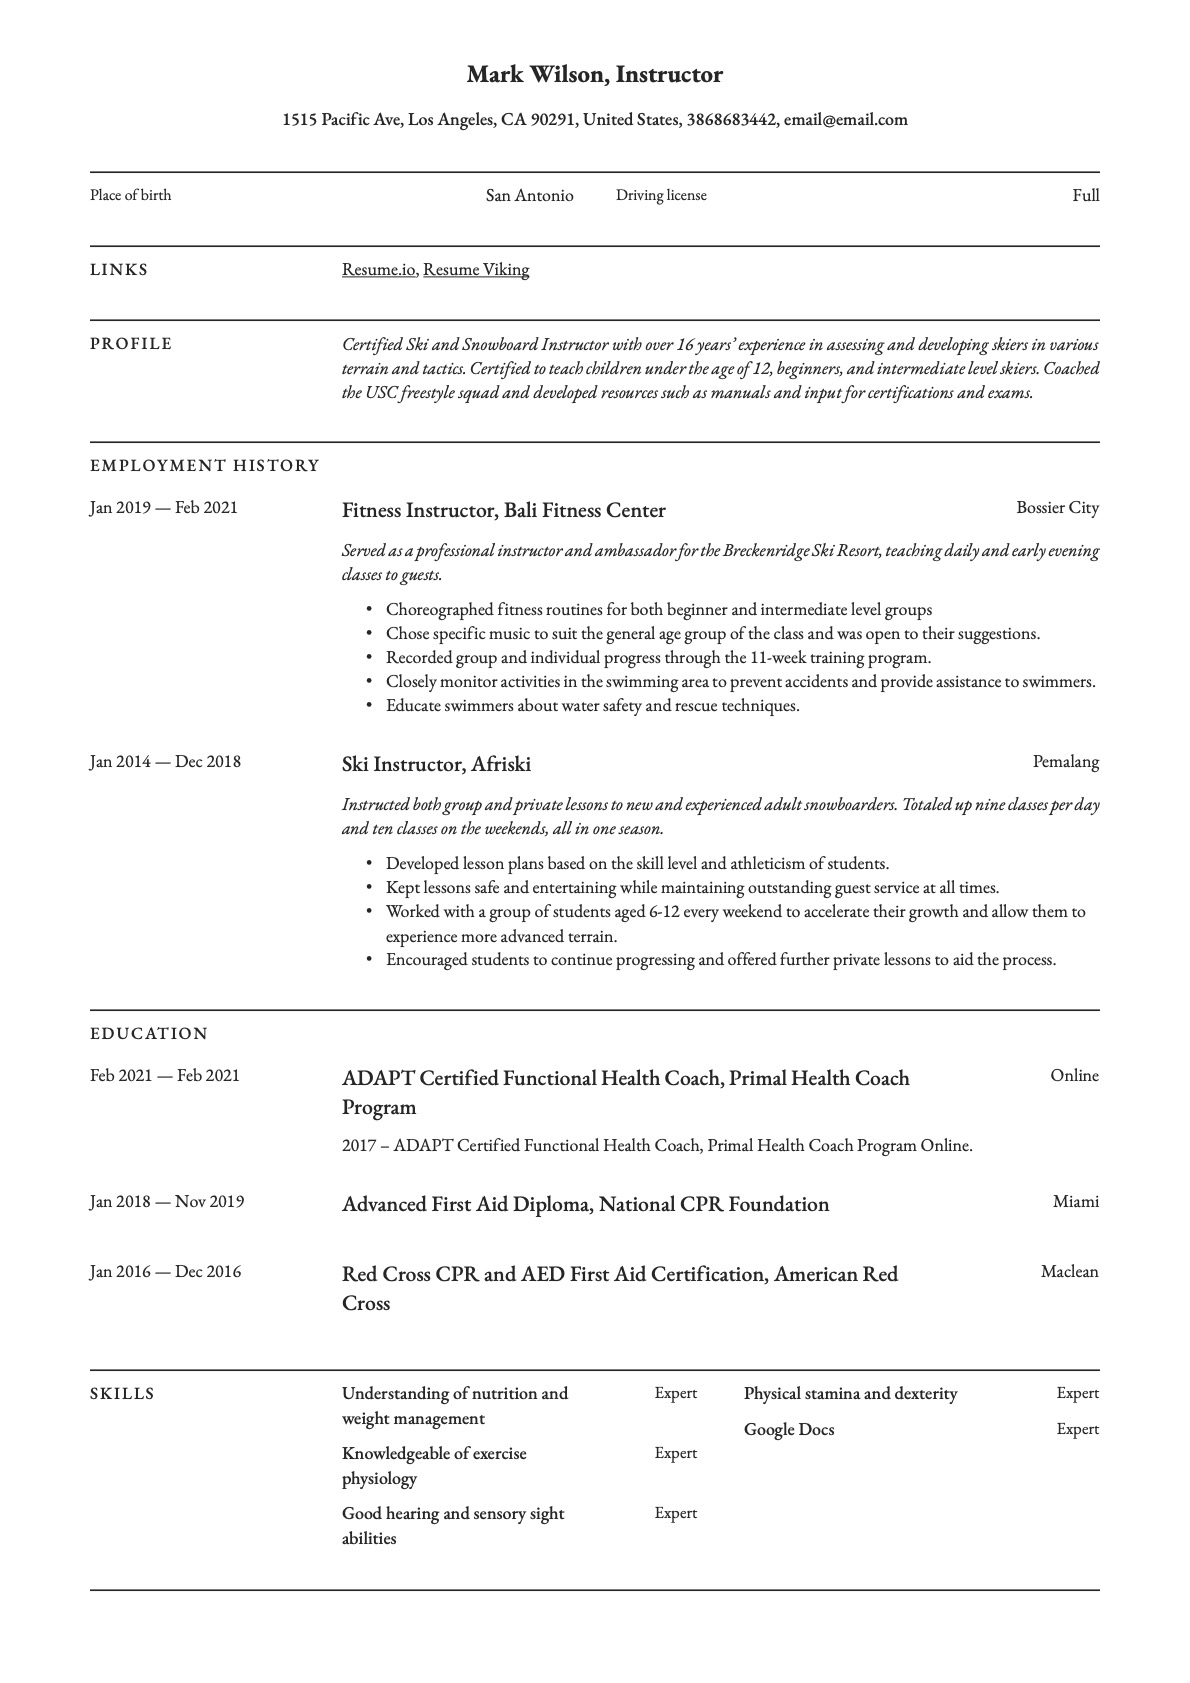 Example Resume Instructor-5